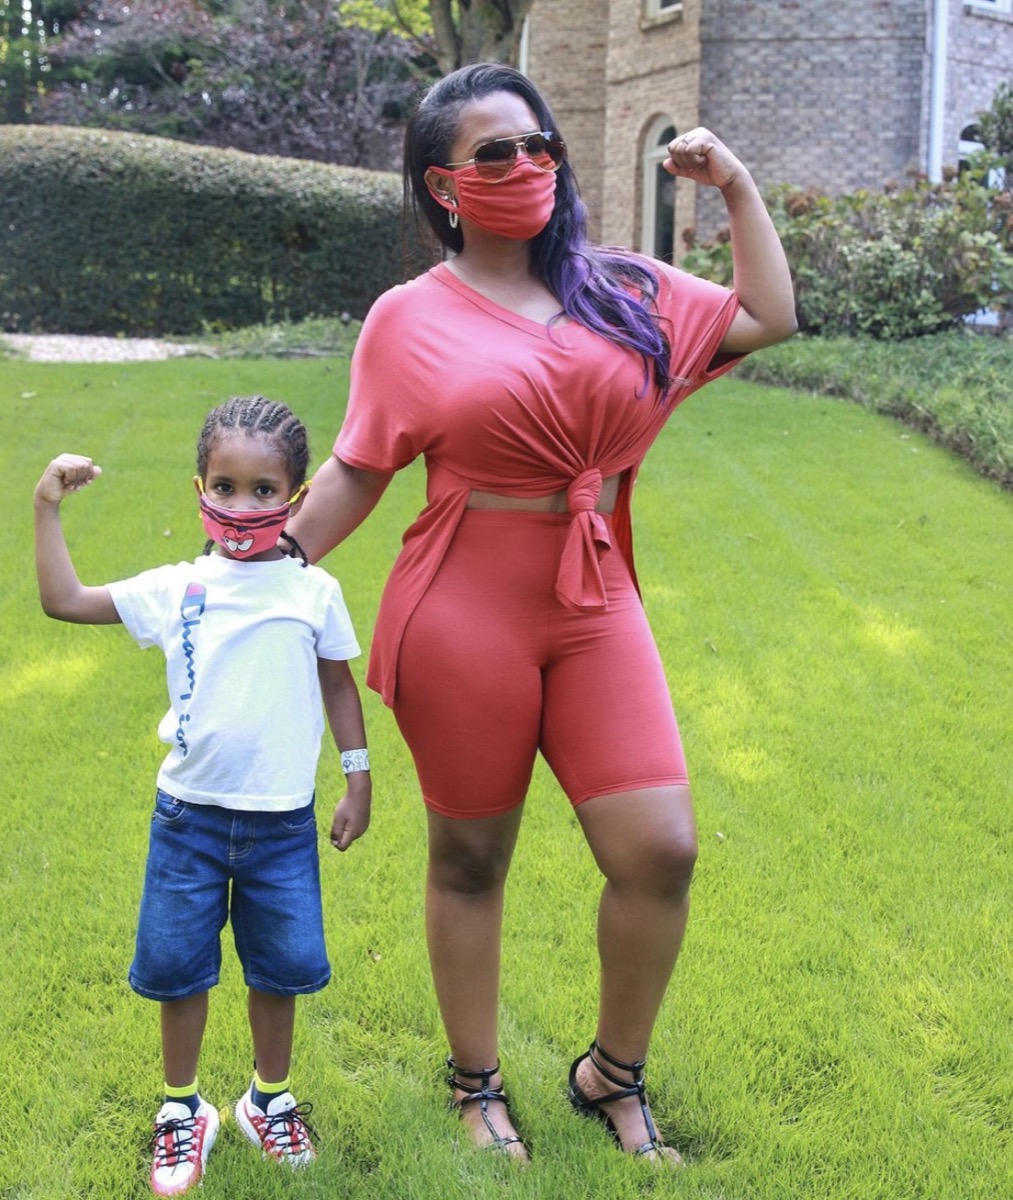 kandi burruss and son ace flexing outdoors on their lawn